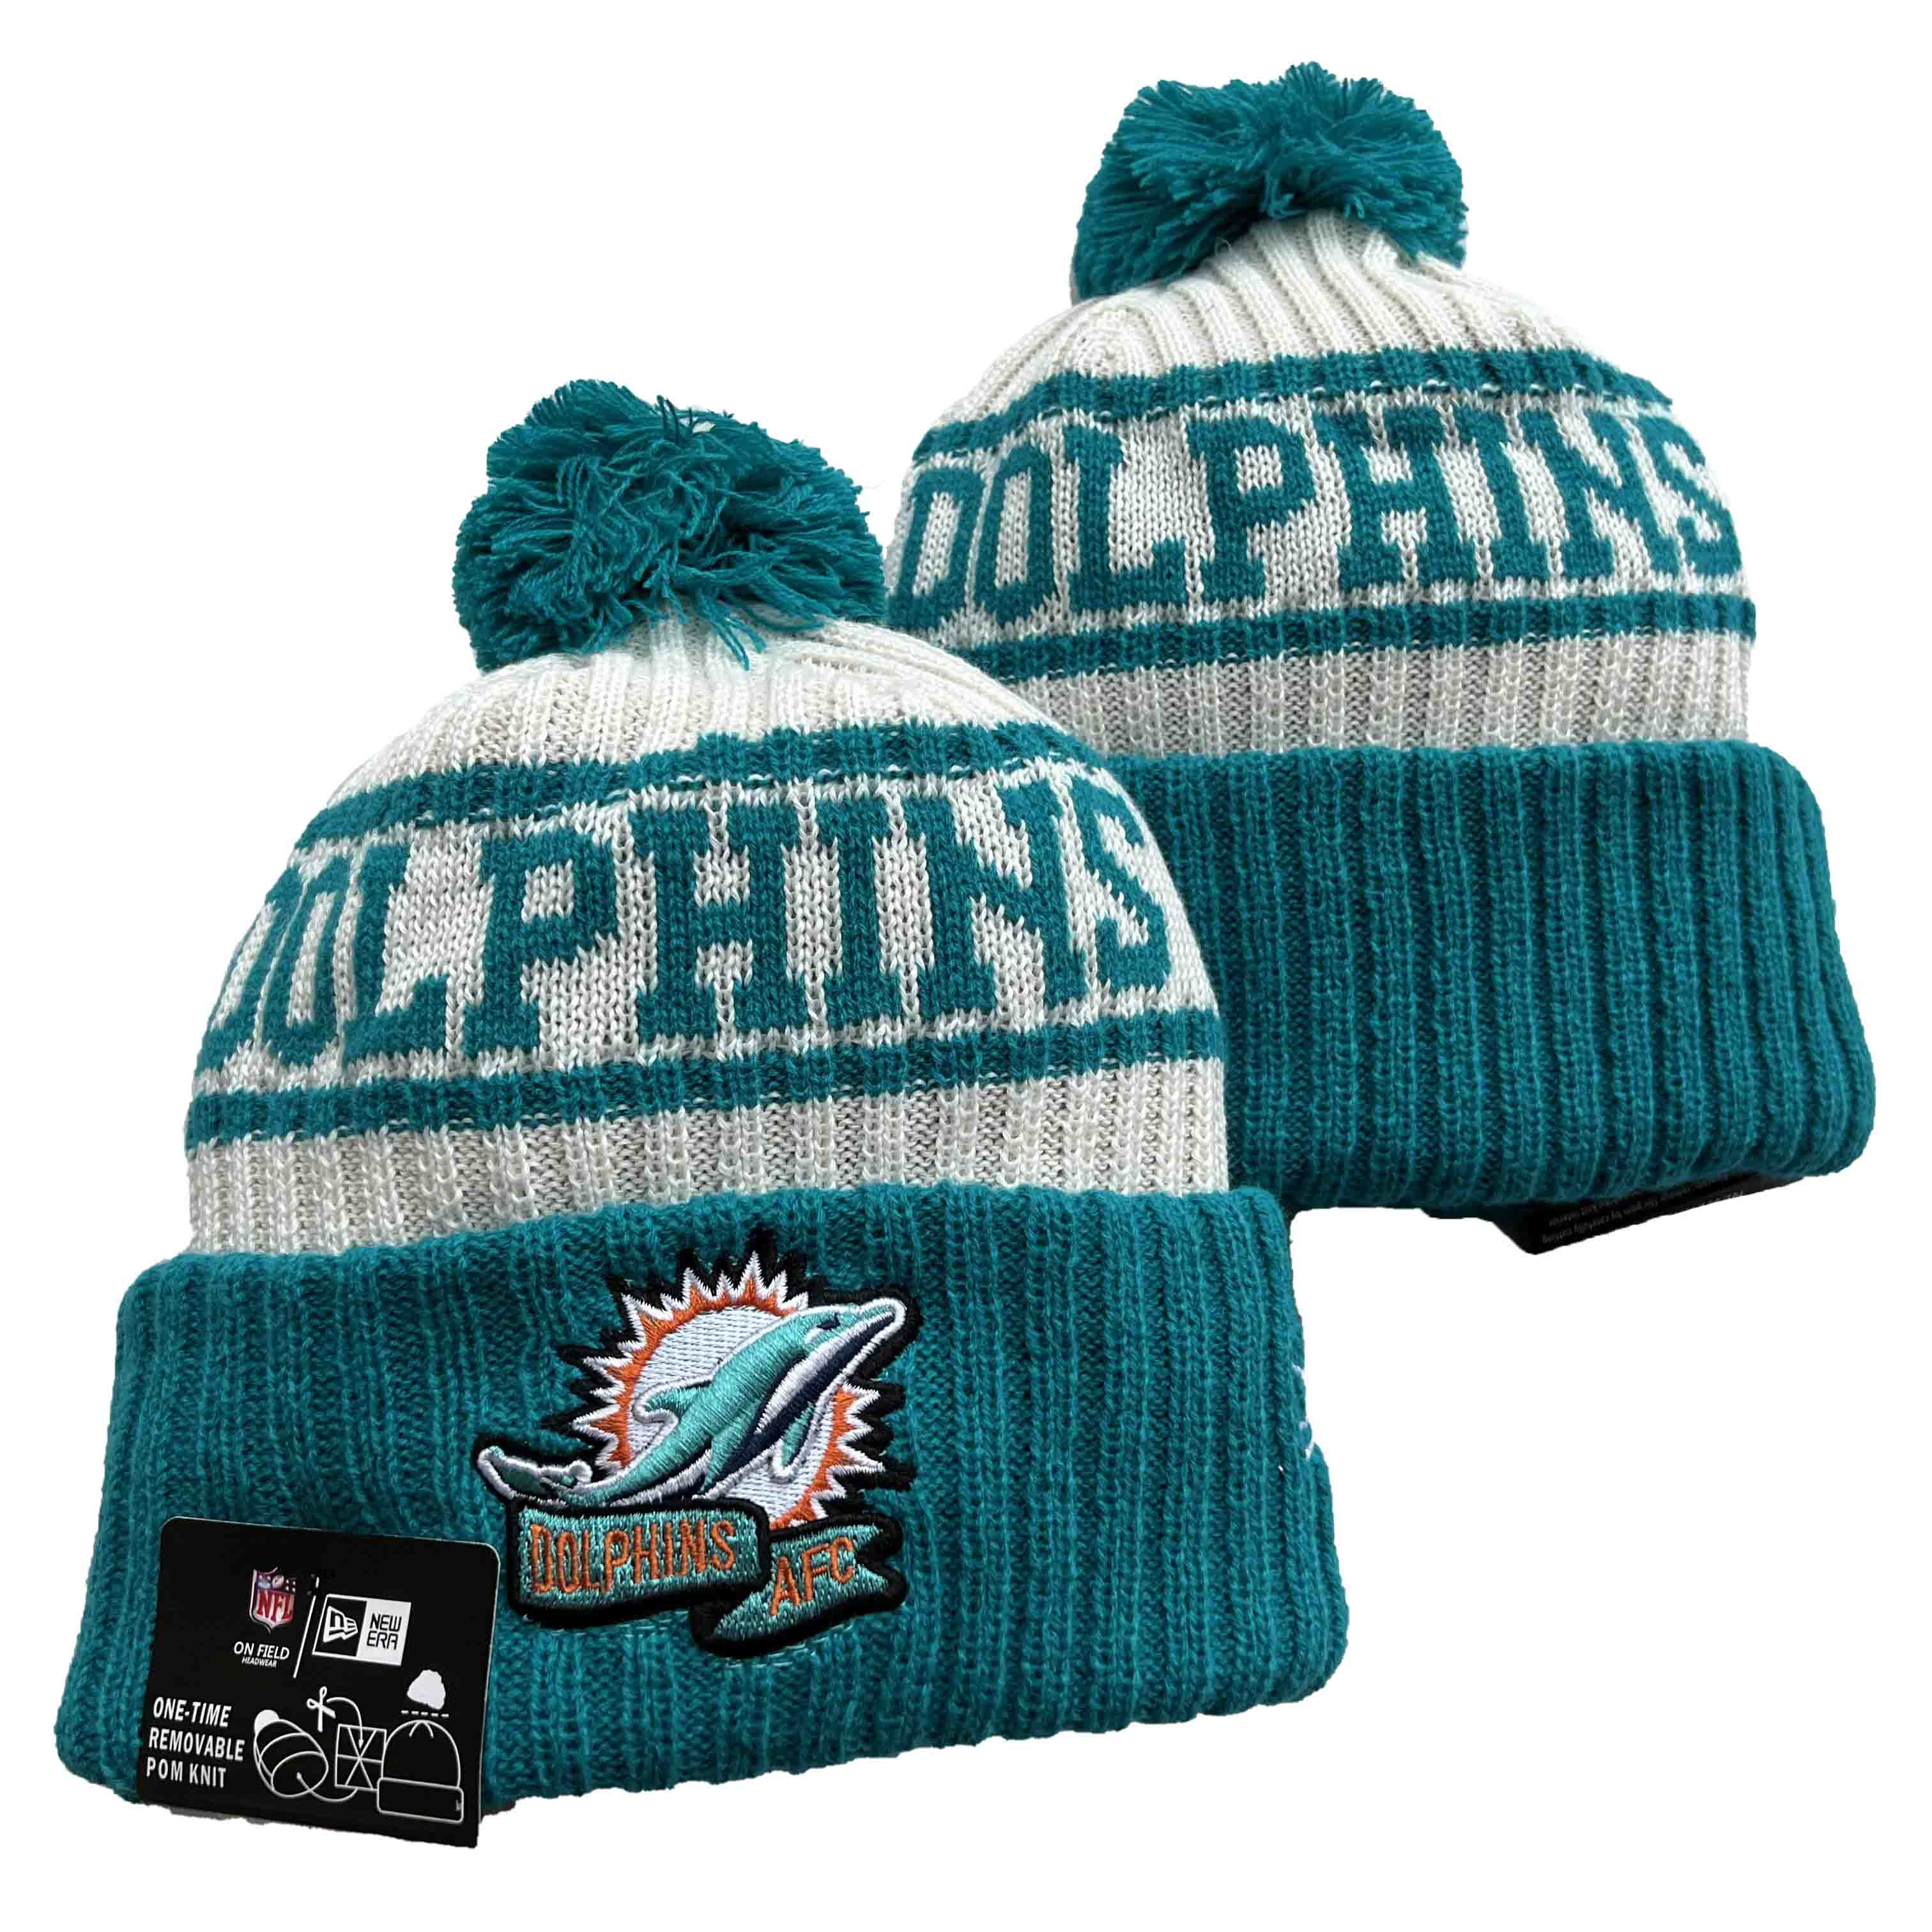 NFL Miami Dolphins Beanies Knit Hats-YD1031